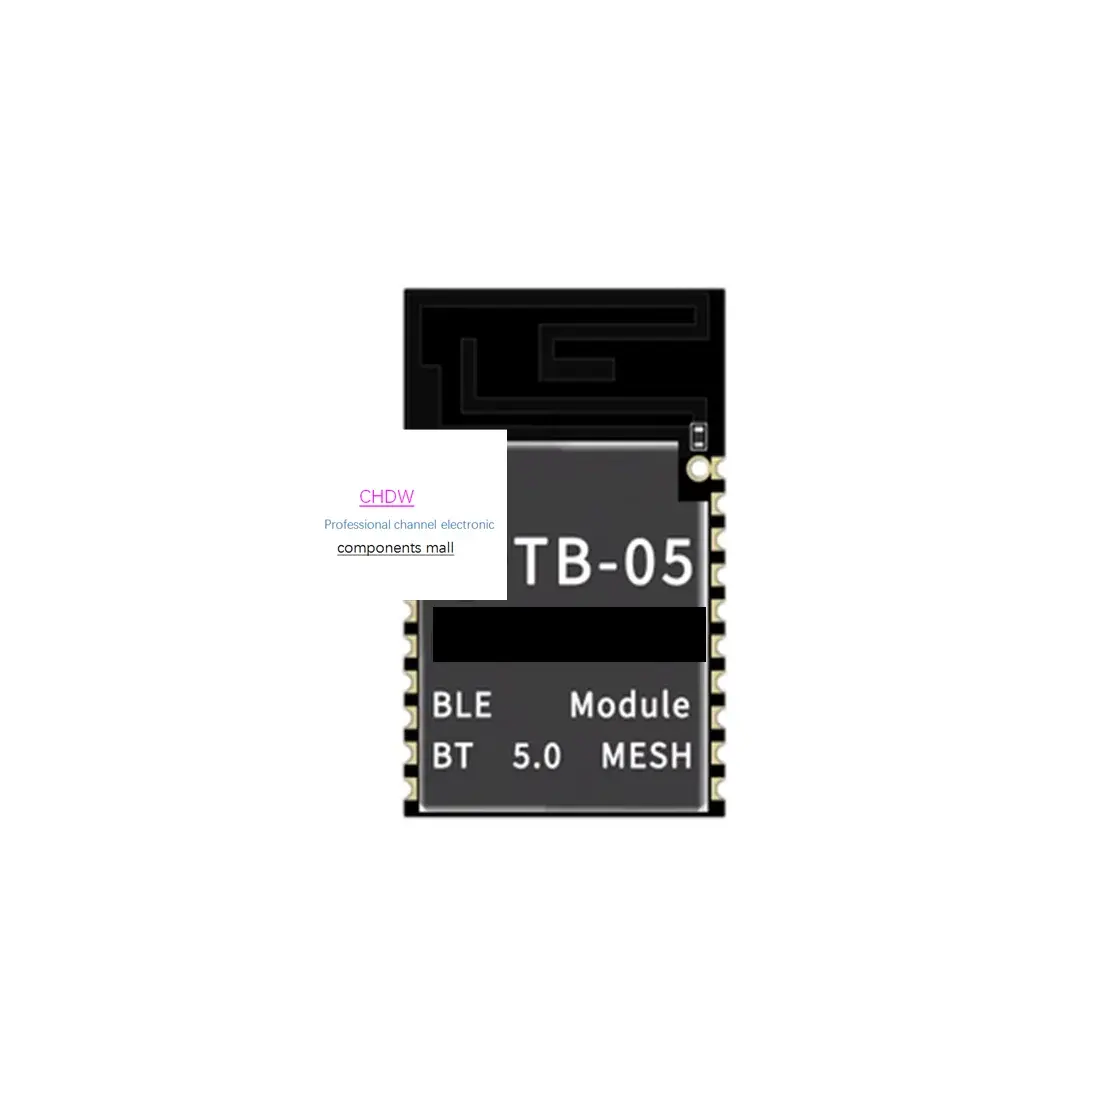 Interface type GPIO/PWM/SPI/ADC Bluetooth version Other antenna types onboard color classification TB-05 Combo AT firmware